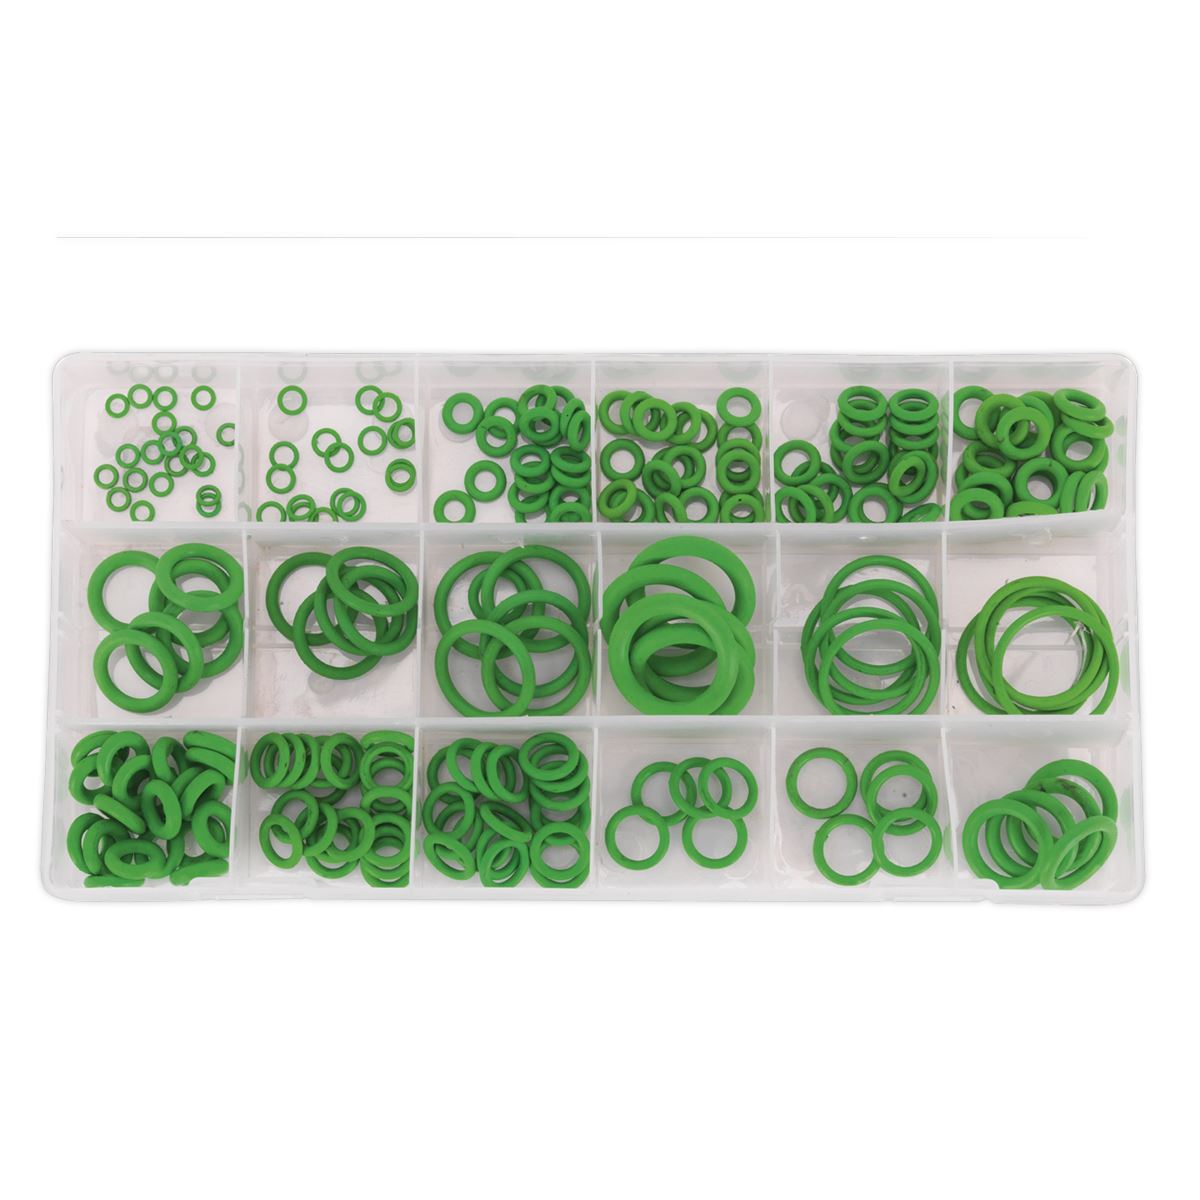 Sealey Air Conditioning Rubber O-Ring Assortment 225pc - Metric